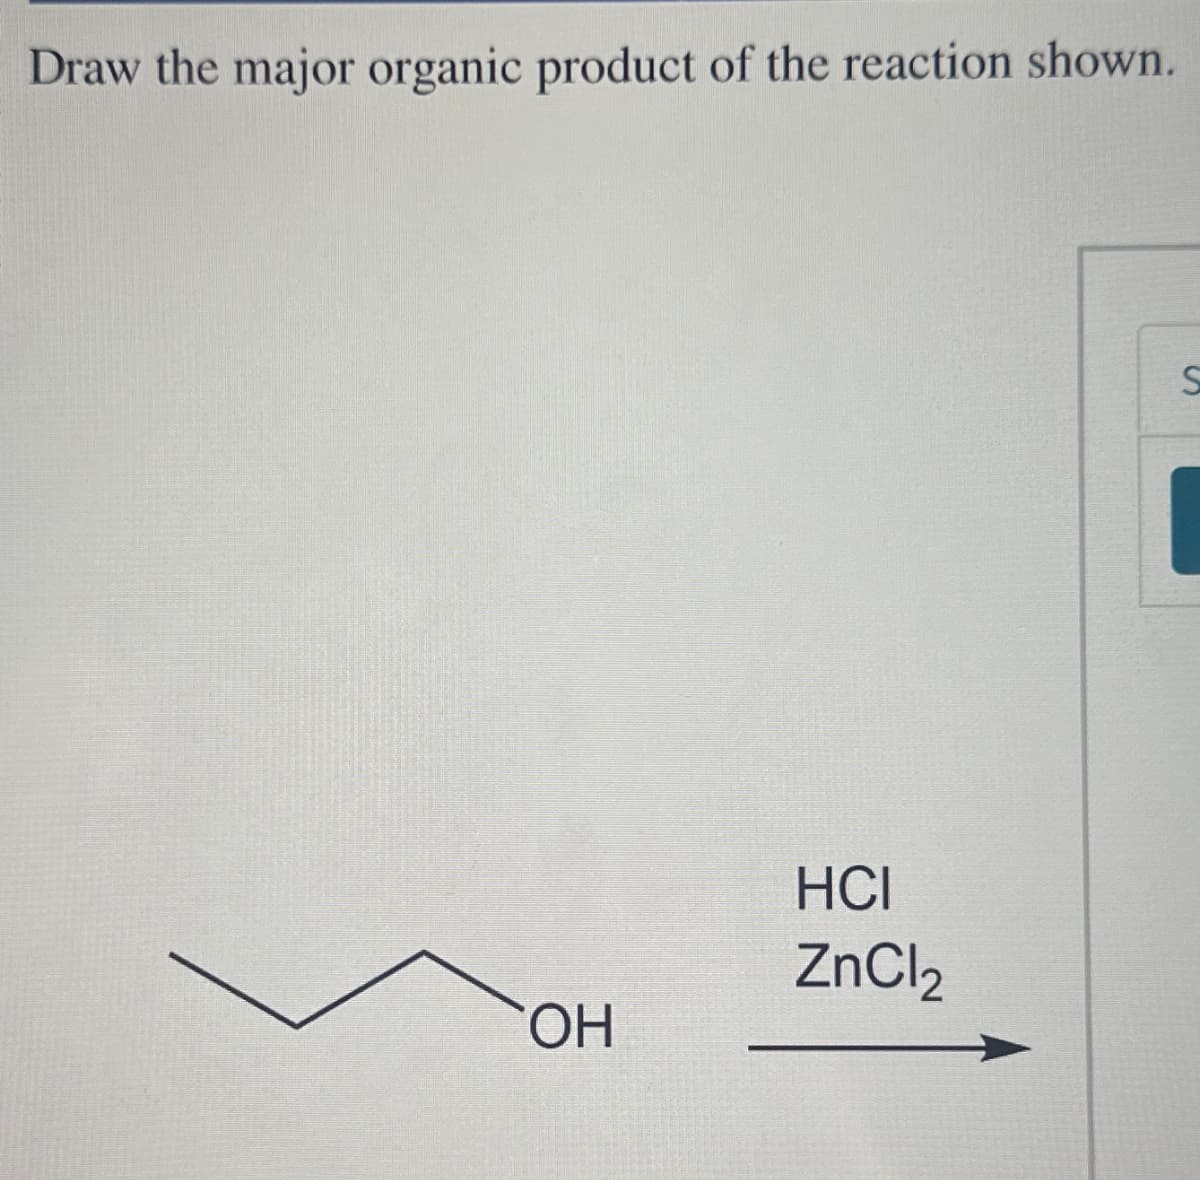 Draw the major organic product of the reaction shown.
OH
HCI
ZnCl₂
S